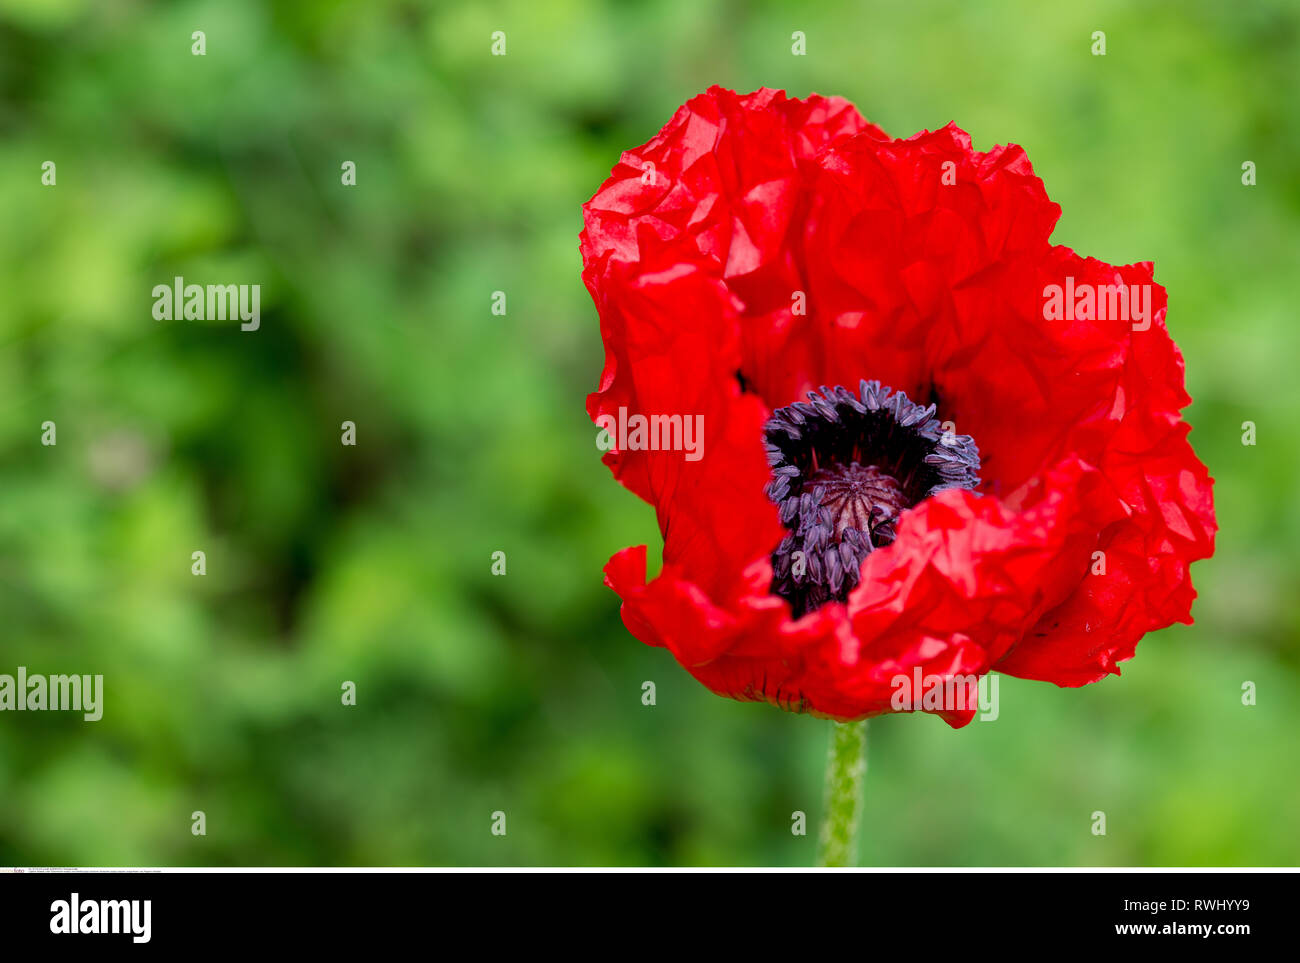 botany, red oriental poppy, Caution! For Greetingcard-Use / Postcard-Use In German Speaking Countries Certain Restrictions May Apply Stock Photo